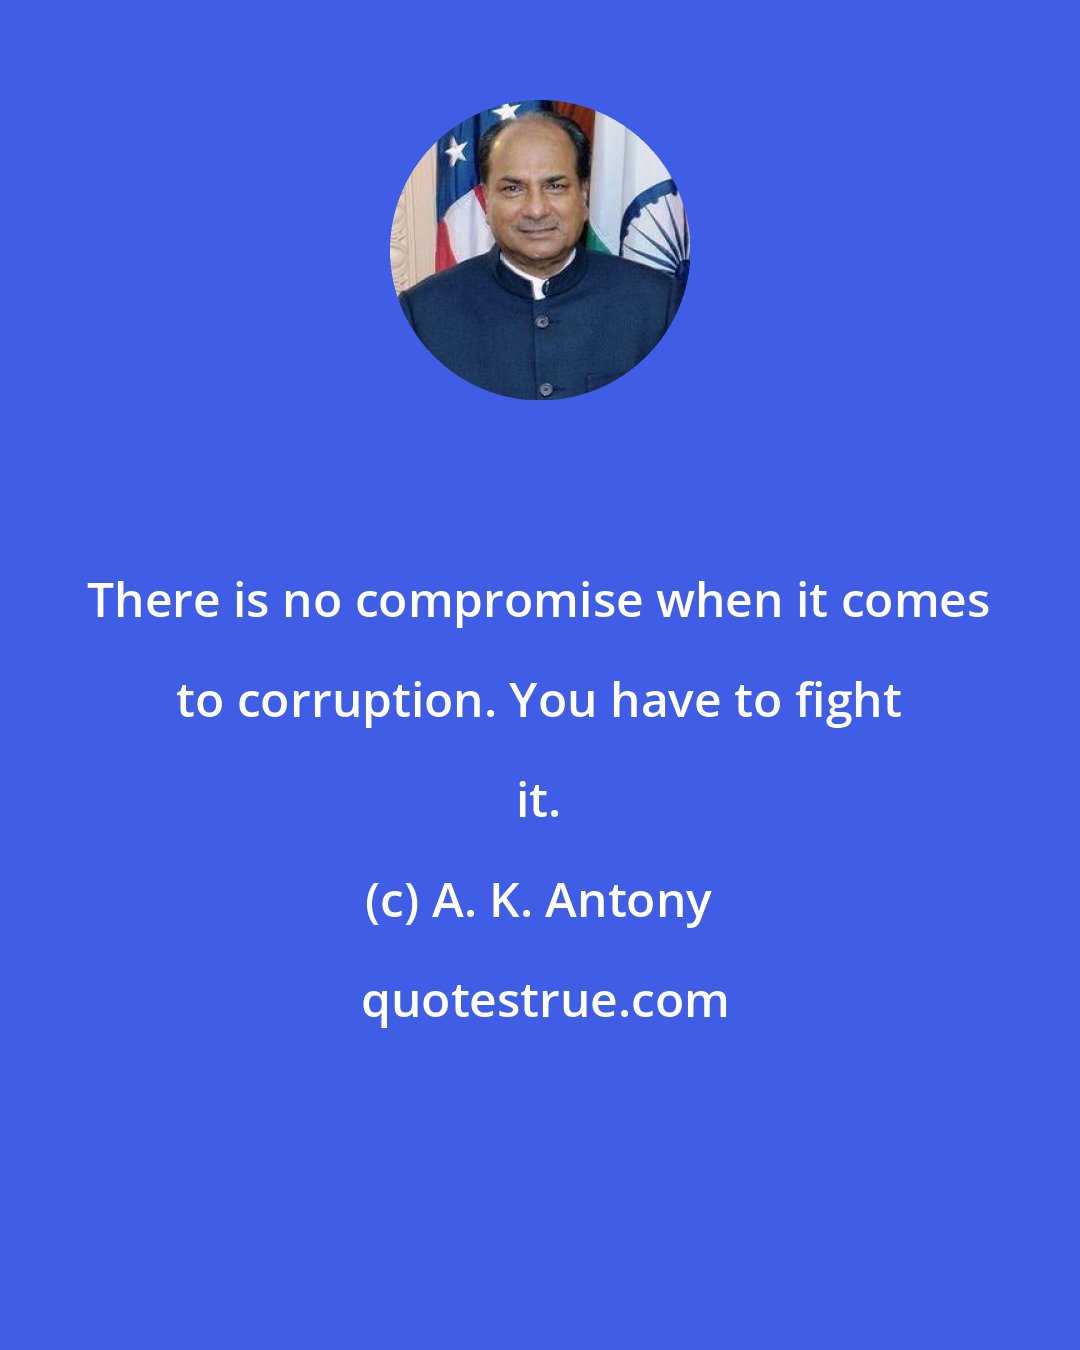 A. K. Antony: There is no compromise when it comes to corruption. You have to fight it.